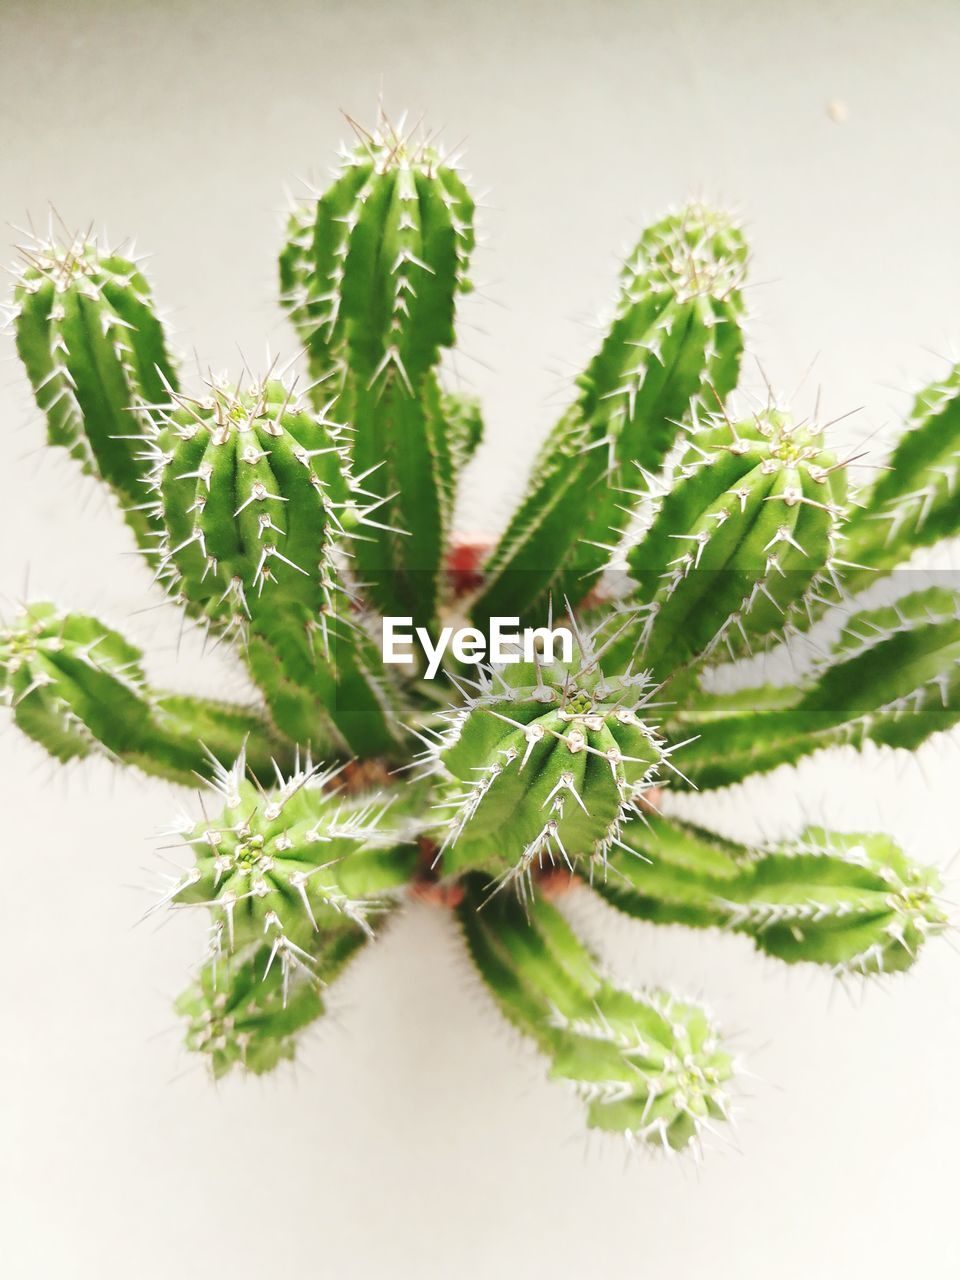 CLOSE-UP OF CACTUS PLANT AGAINST WHITE BACKGROUND